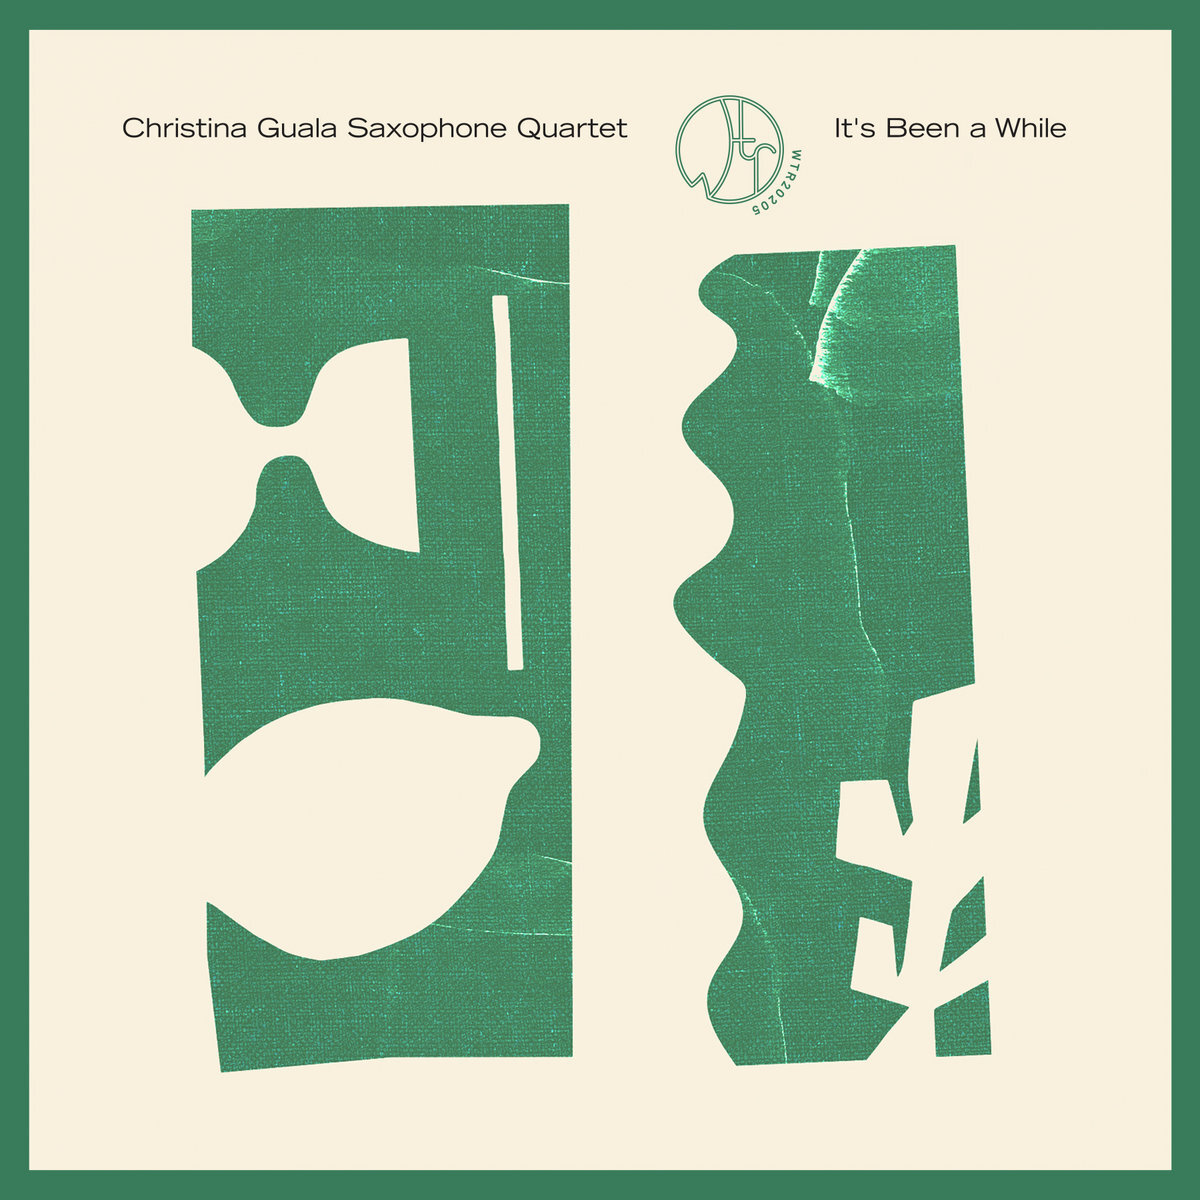  Christina Guala Saxophone Quartet - "It's Been a While" [Recorded & Mixed (JB), Mastered (JP), Produced (AP), WTR]